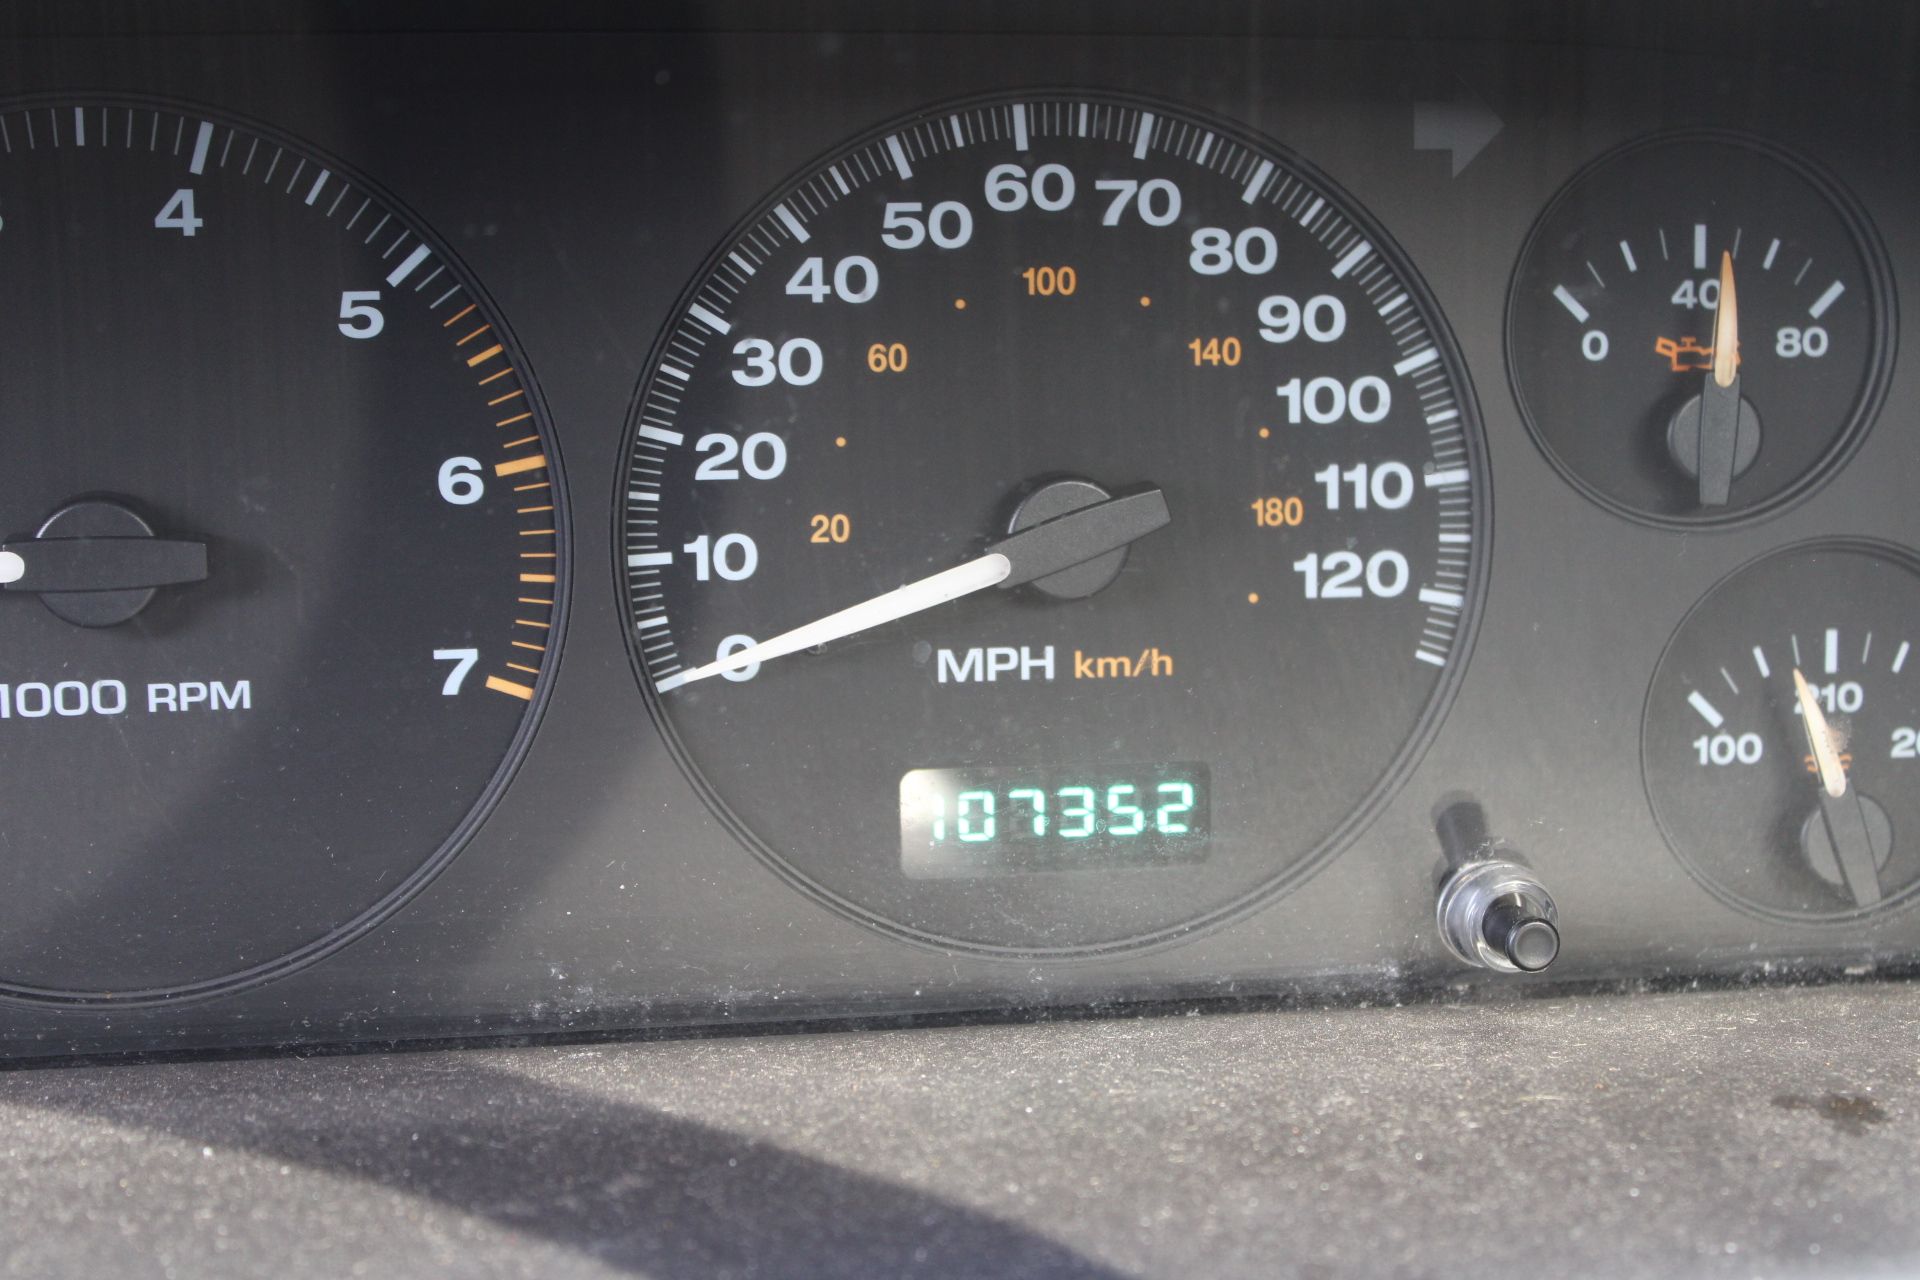 1999 JEEP GRAND CHEROKEE LIMITED, 4WD, 4.7L V-8,VIN 1J4GW68N5XC579232, 107,352 MILES ON ODOMETER, - Image 6 of 9